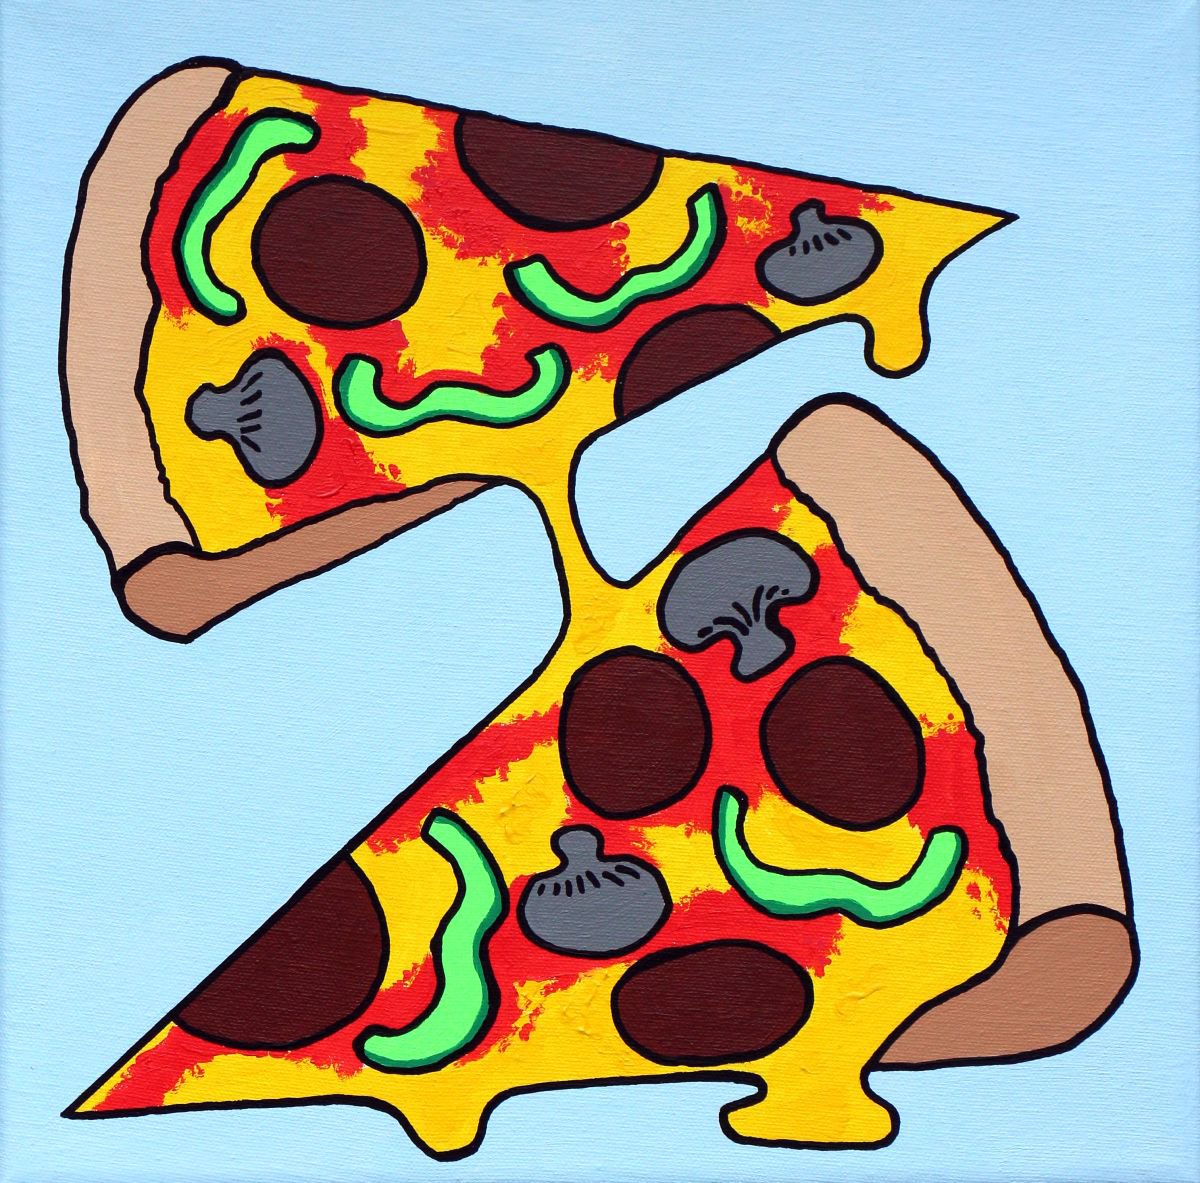 Two Slice Pizza Pop Art Painting On Canvas Artfinder